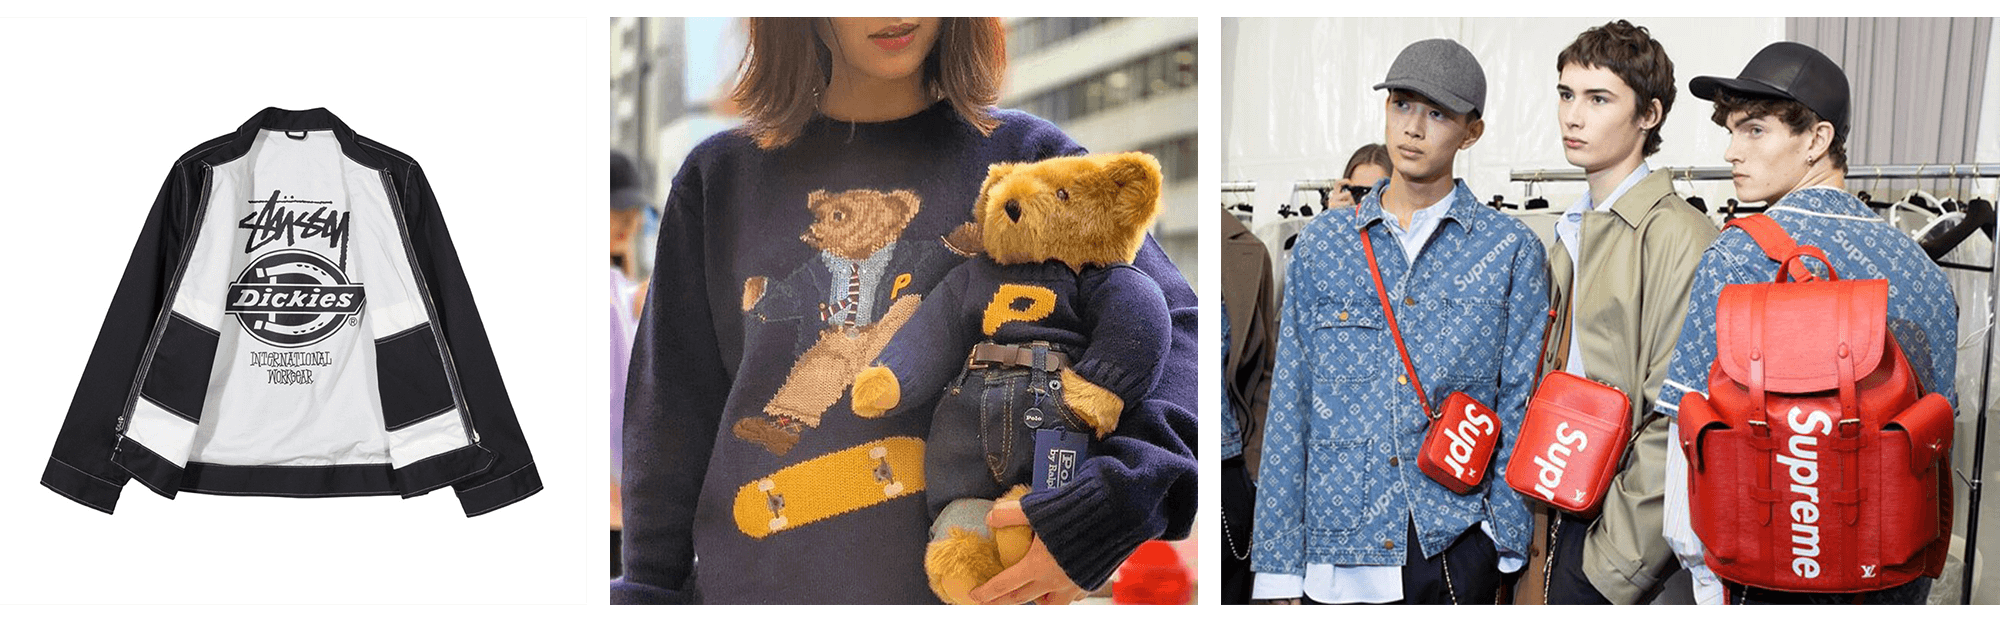 three images of skateboard and fashion brand collaborations featuring clothing, a teddy bear and backpacks